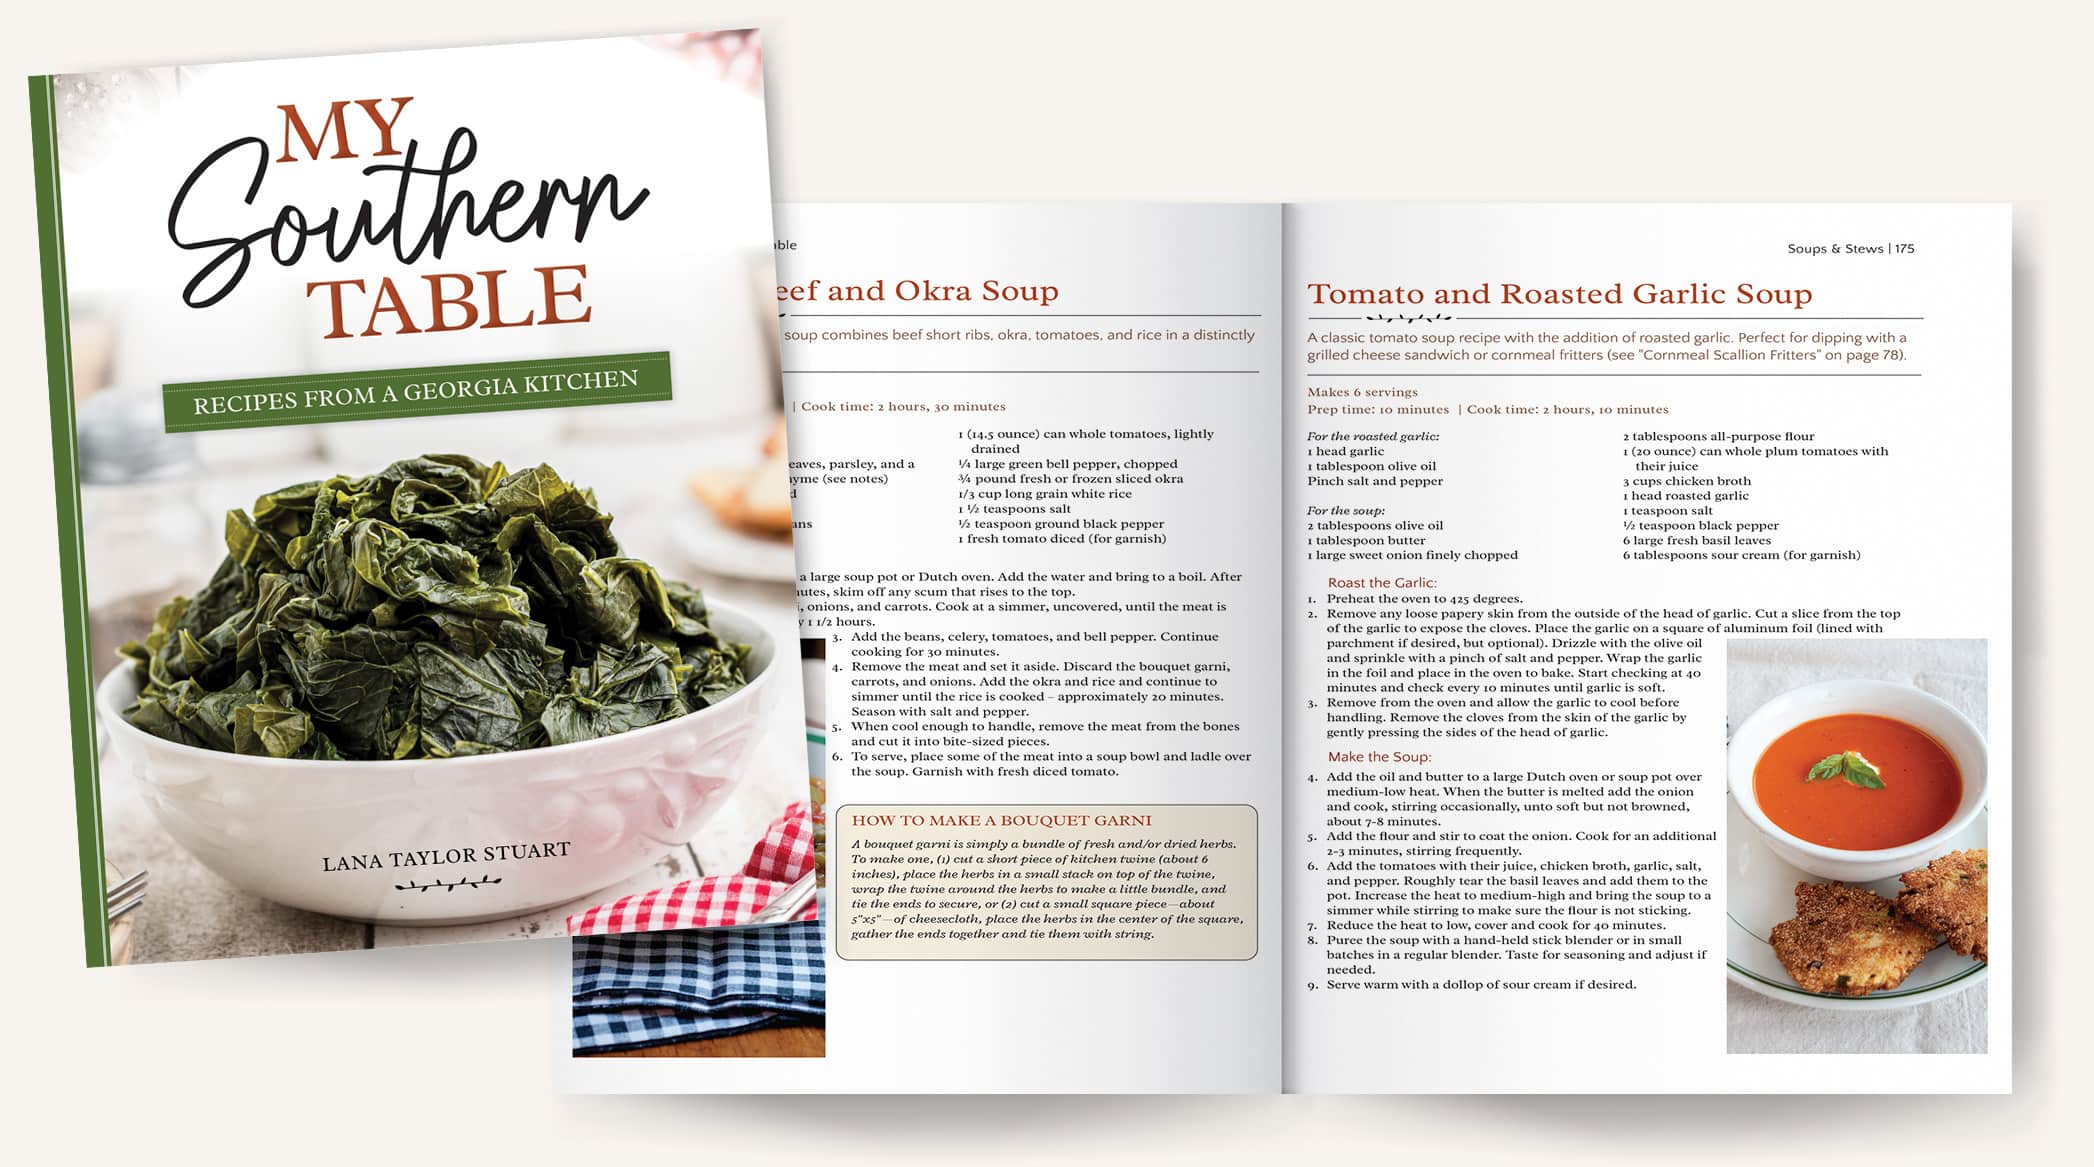 Cookbook mockup showing the page where this recipe is found.